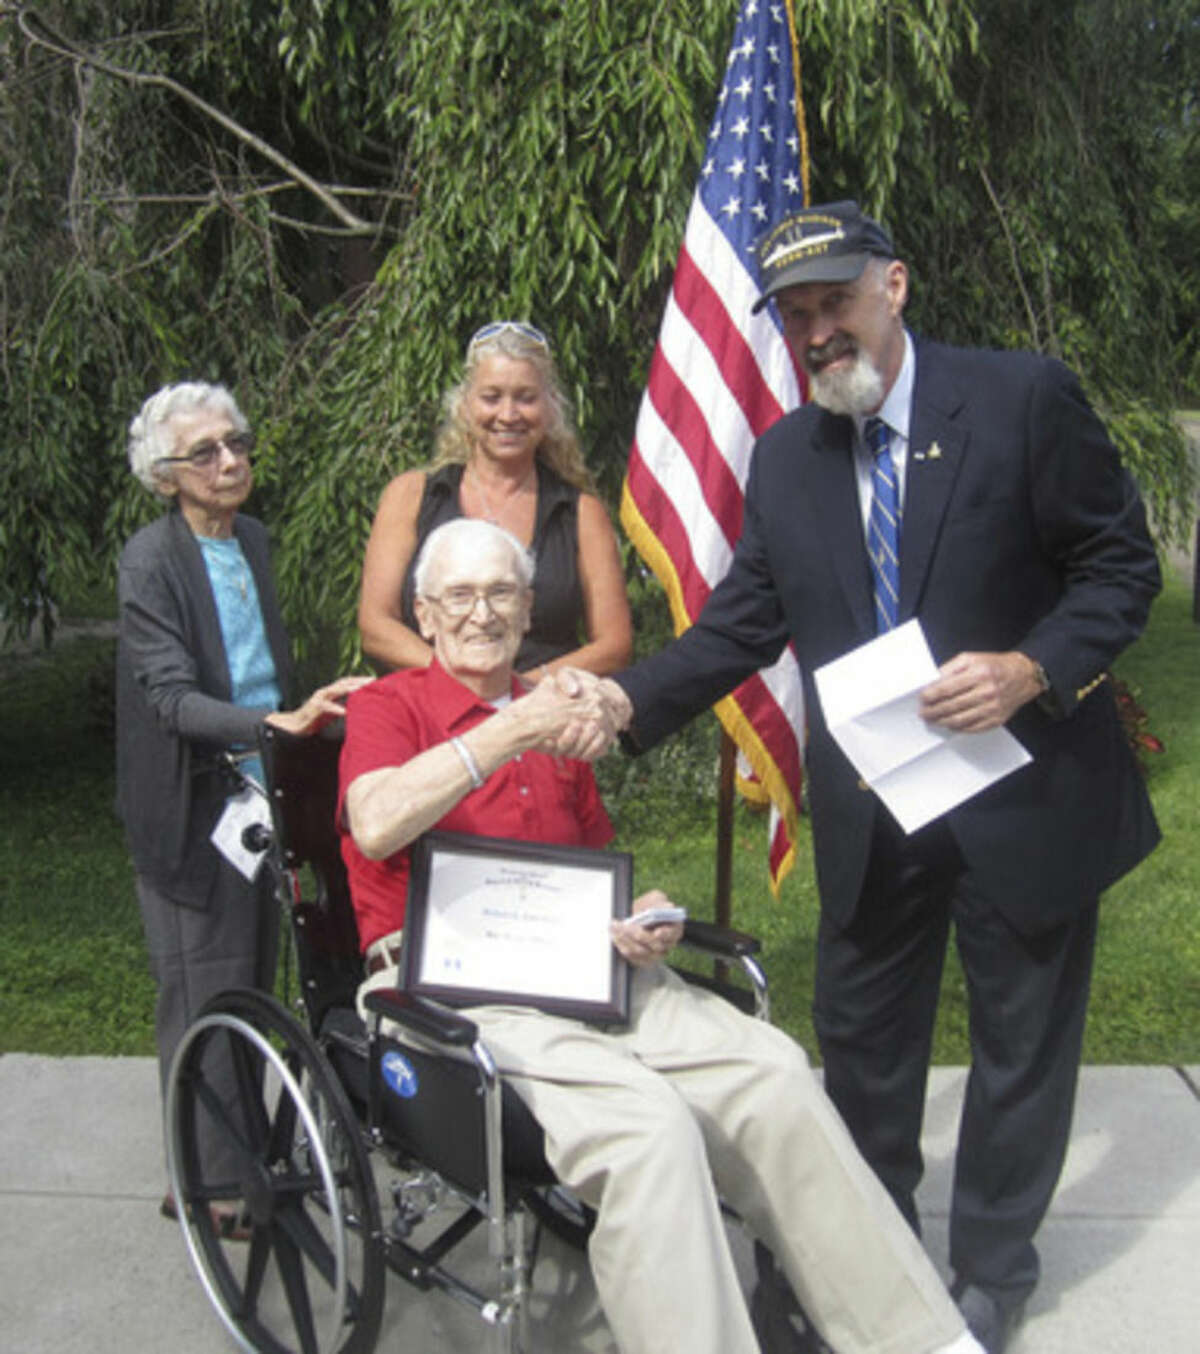 Contributed photo WWII veteran Robert G. Lanehart receives a War Service Medal and Certificate from the Roger Sherman Branch, Sons of the American Revolution this week at Aurora Senior Living in Norwalk.